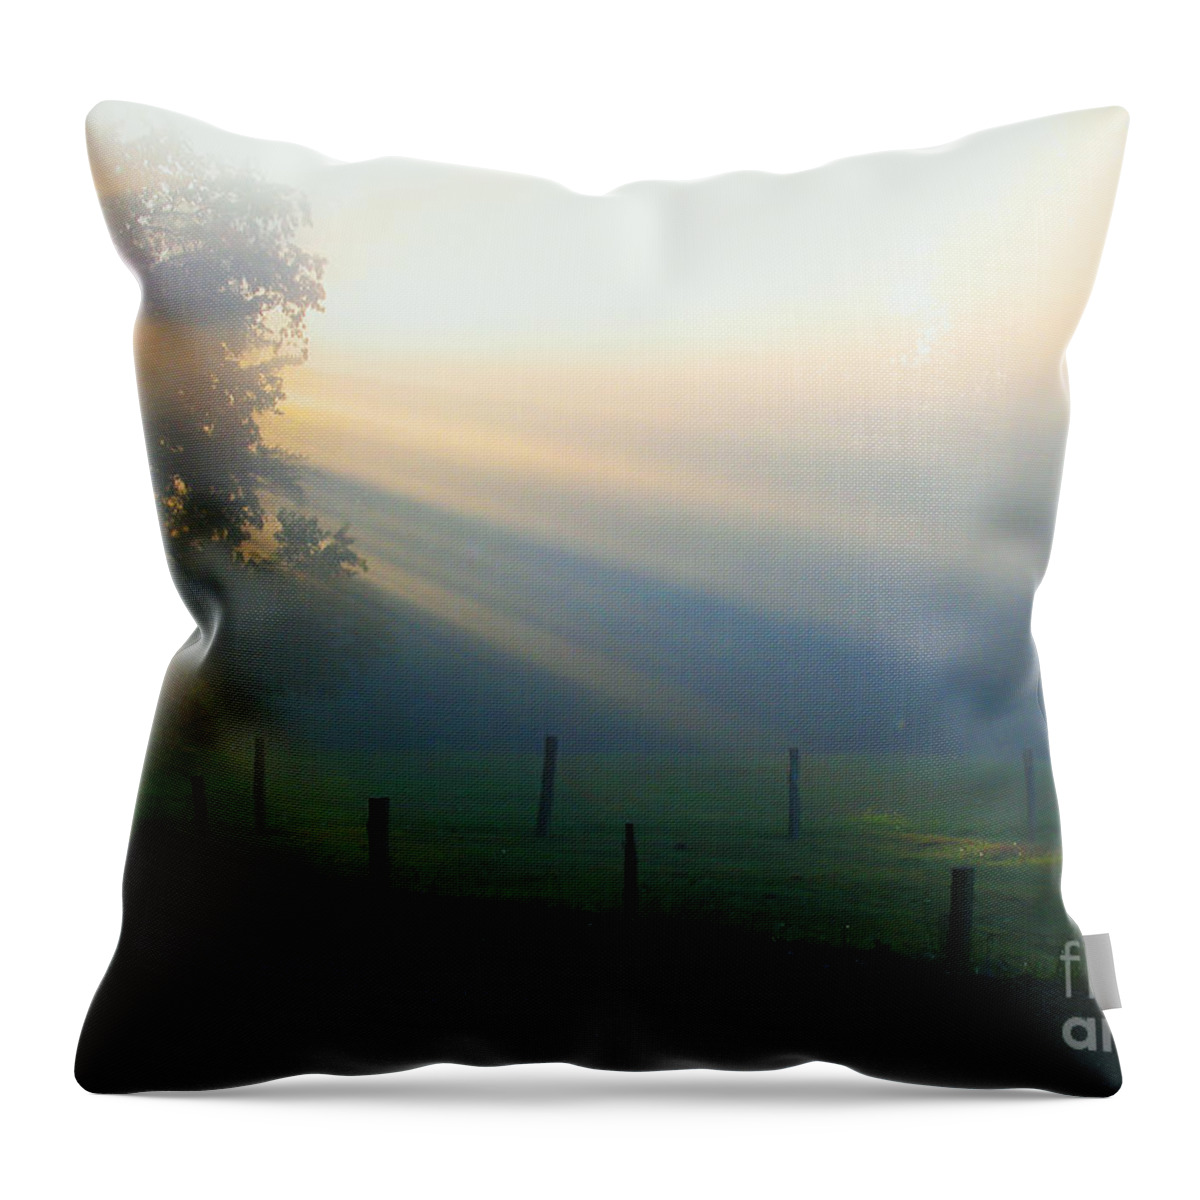 Sunrise Throw Pillow featuring the photograph His Light II by Douglas Stucky